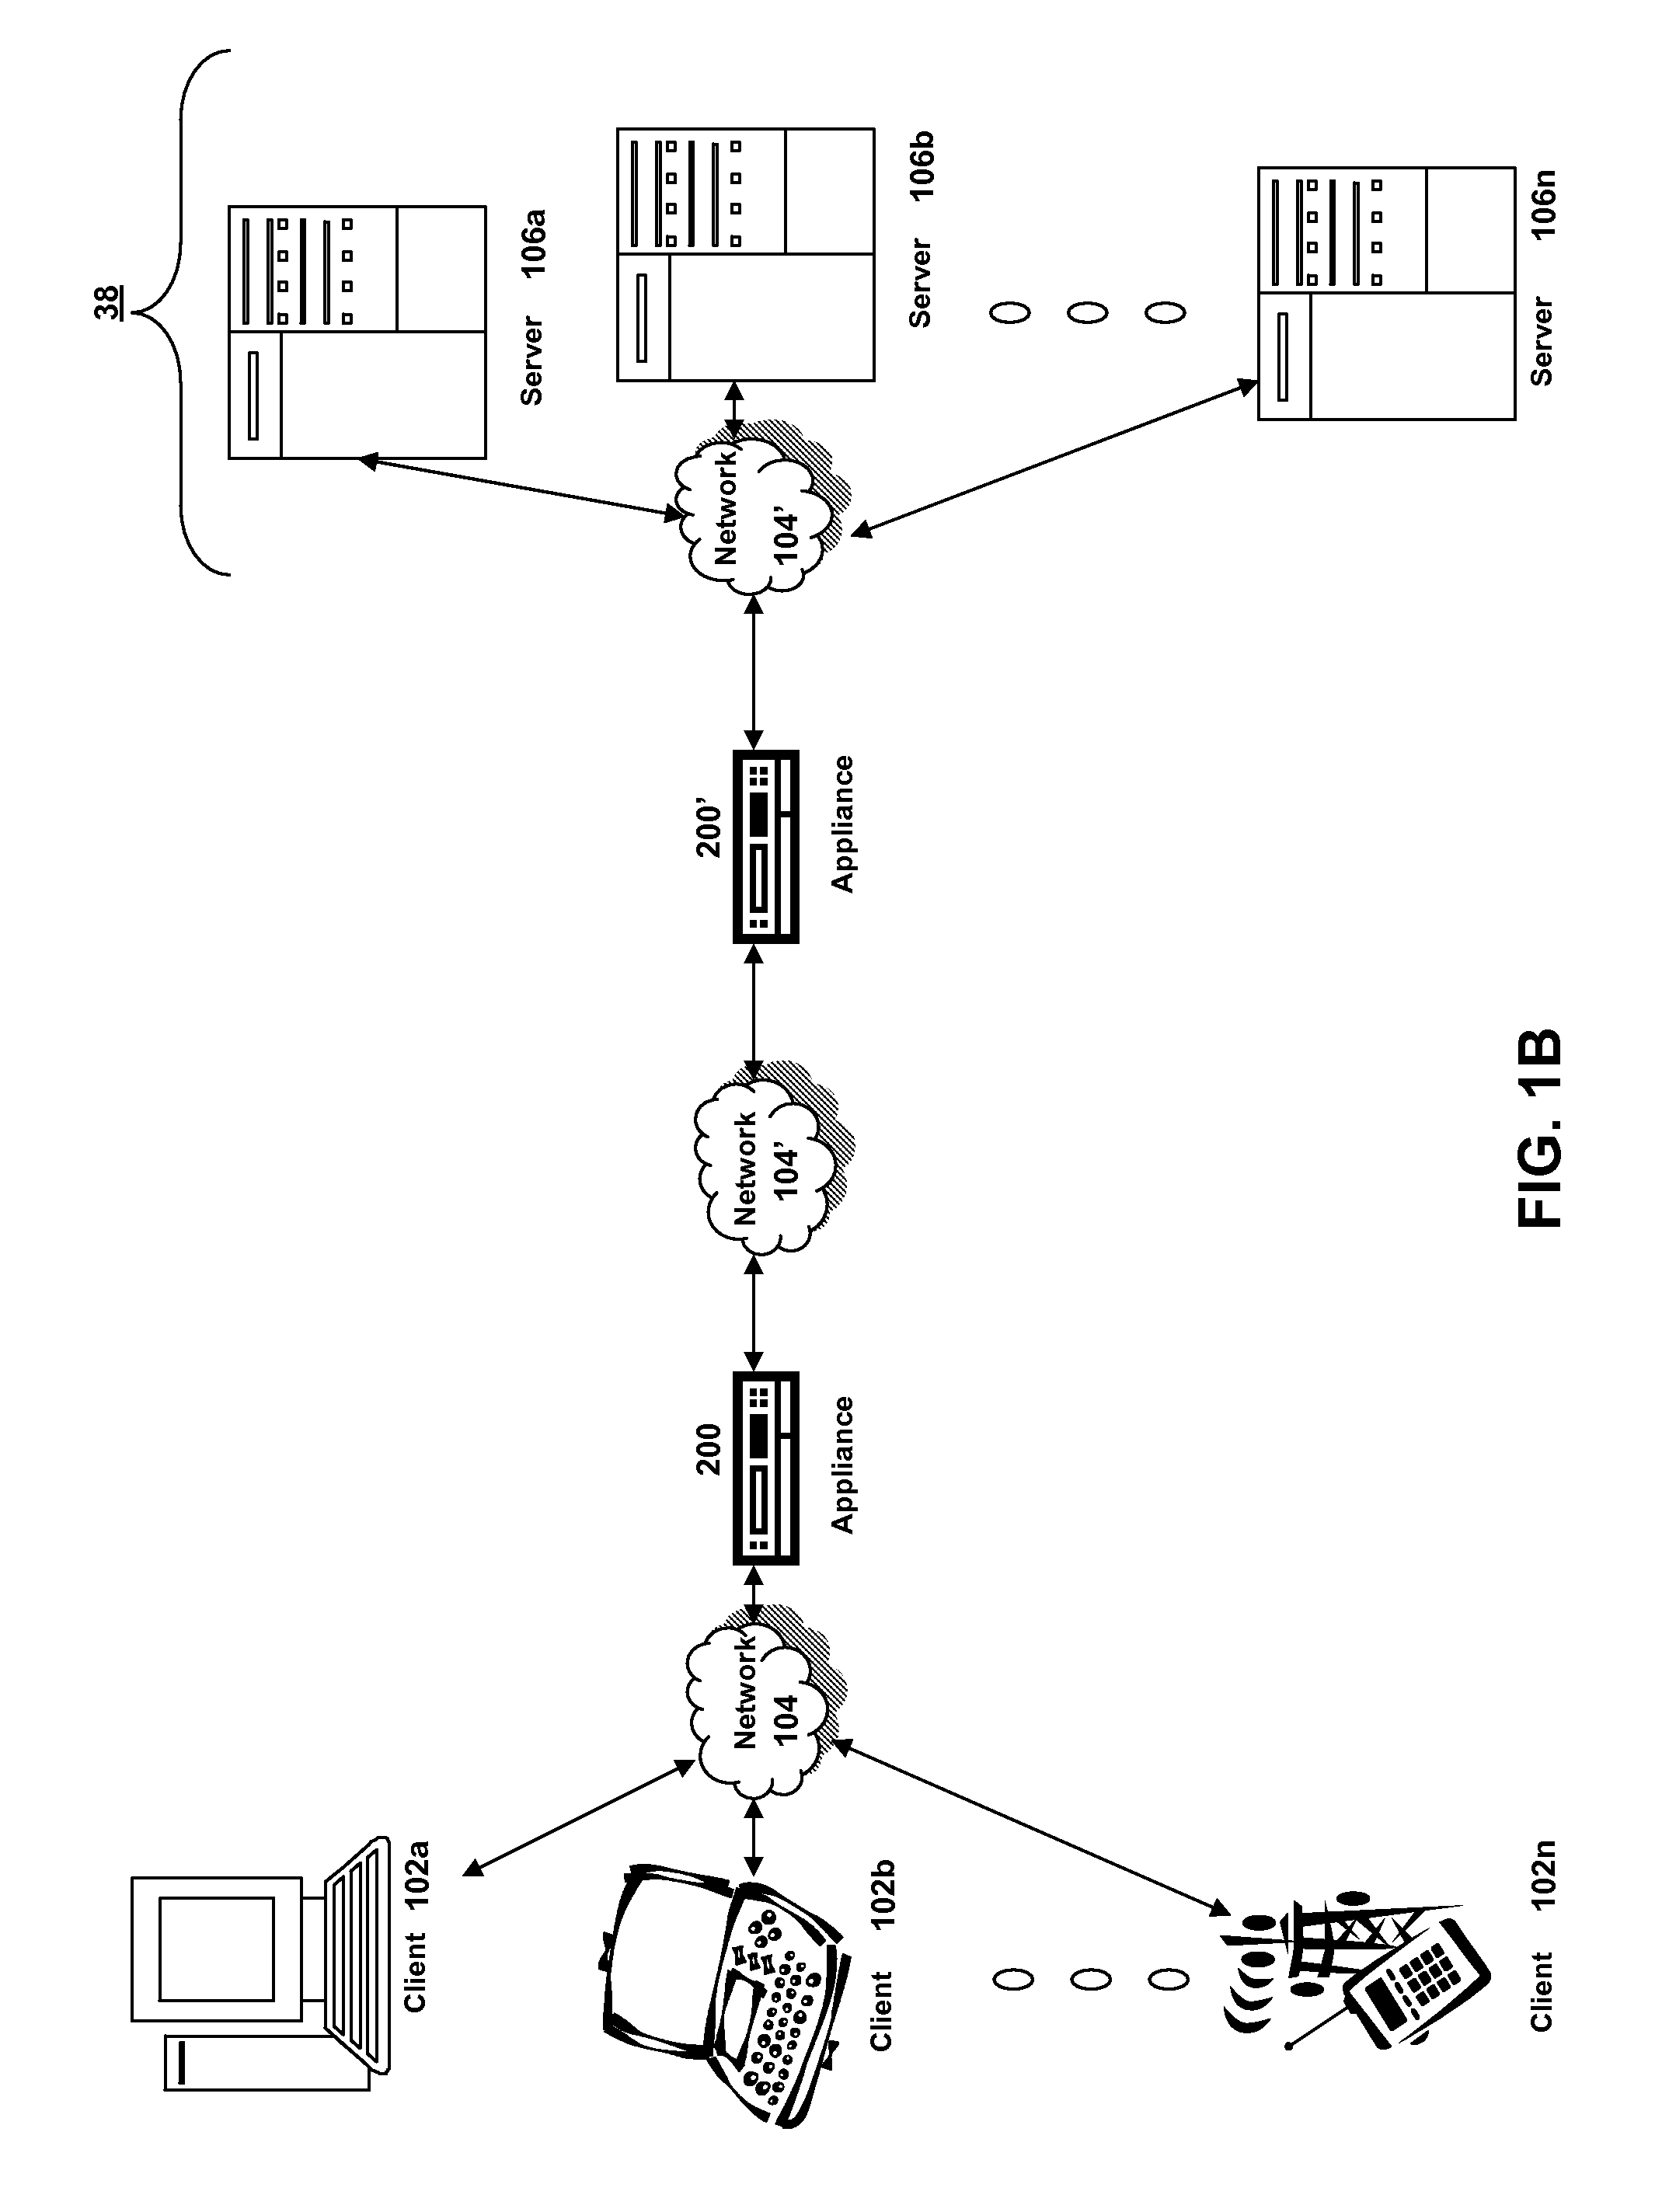 Systems and methods for managing application security profiles